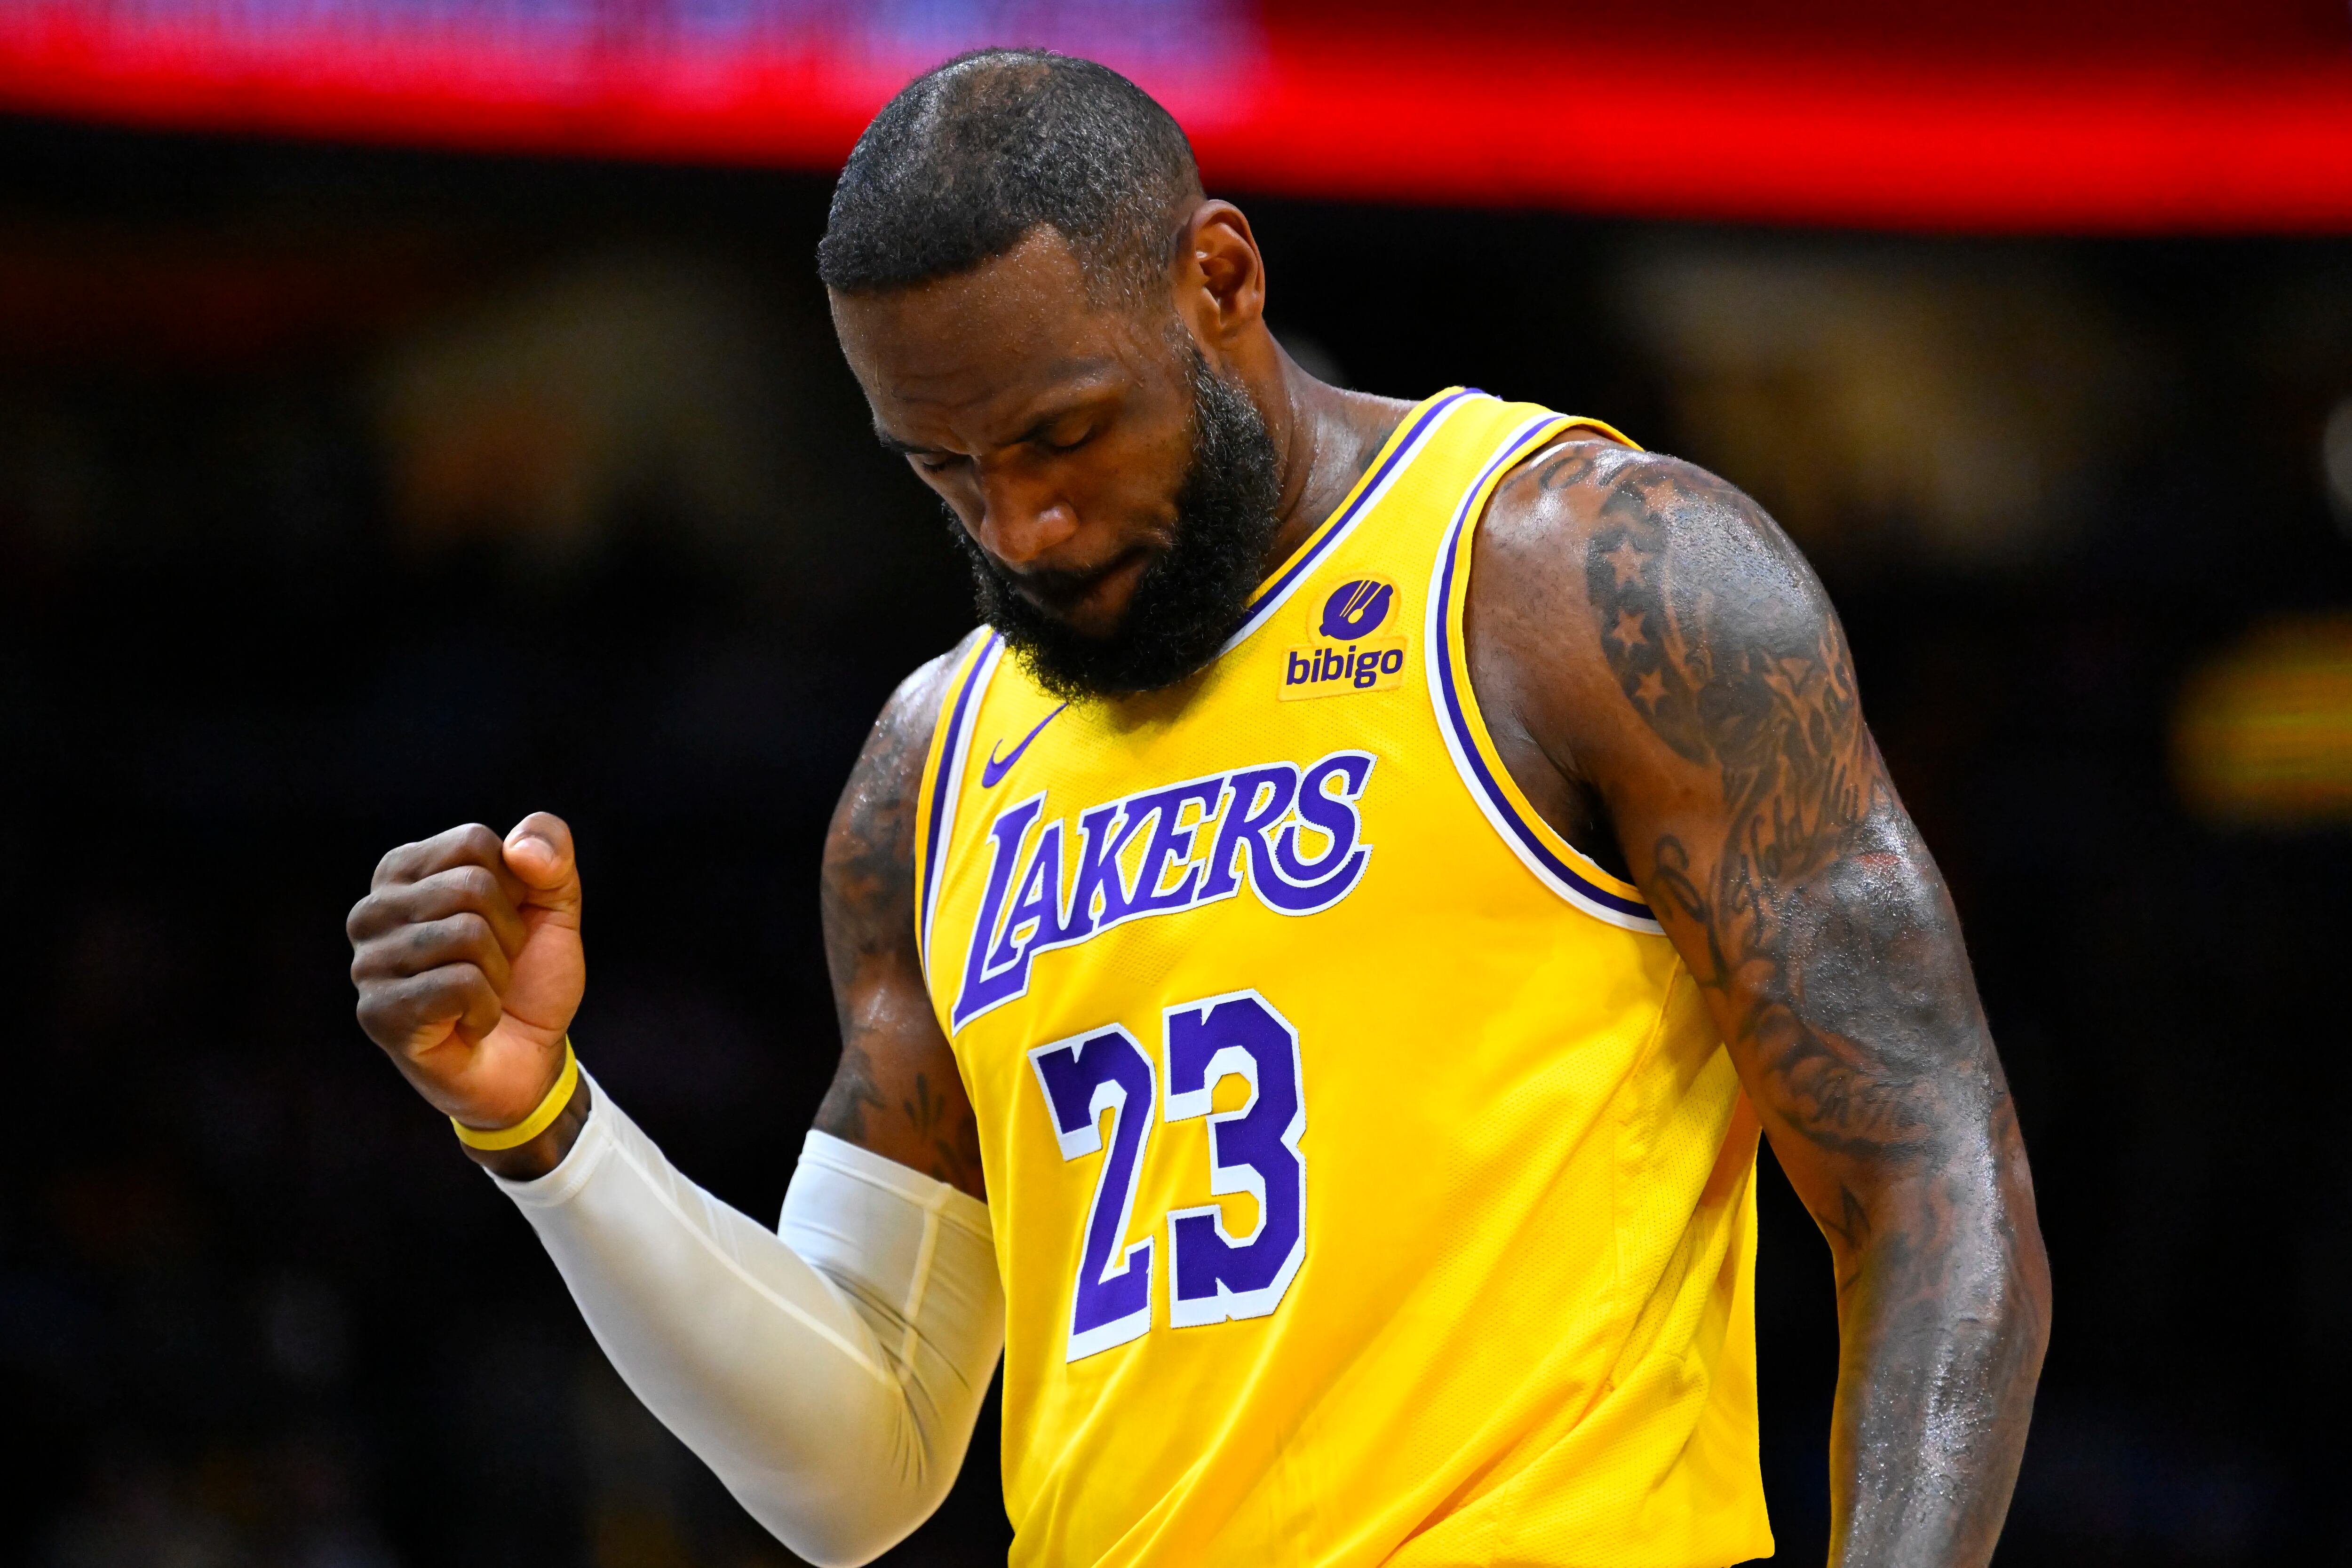 LeBron James and the Lakers won their play-in game Tuesday night against the Pelicans. 